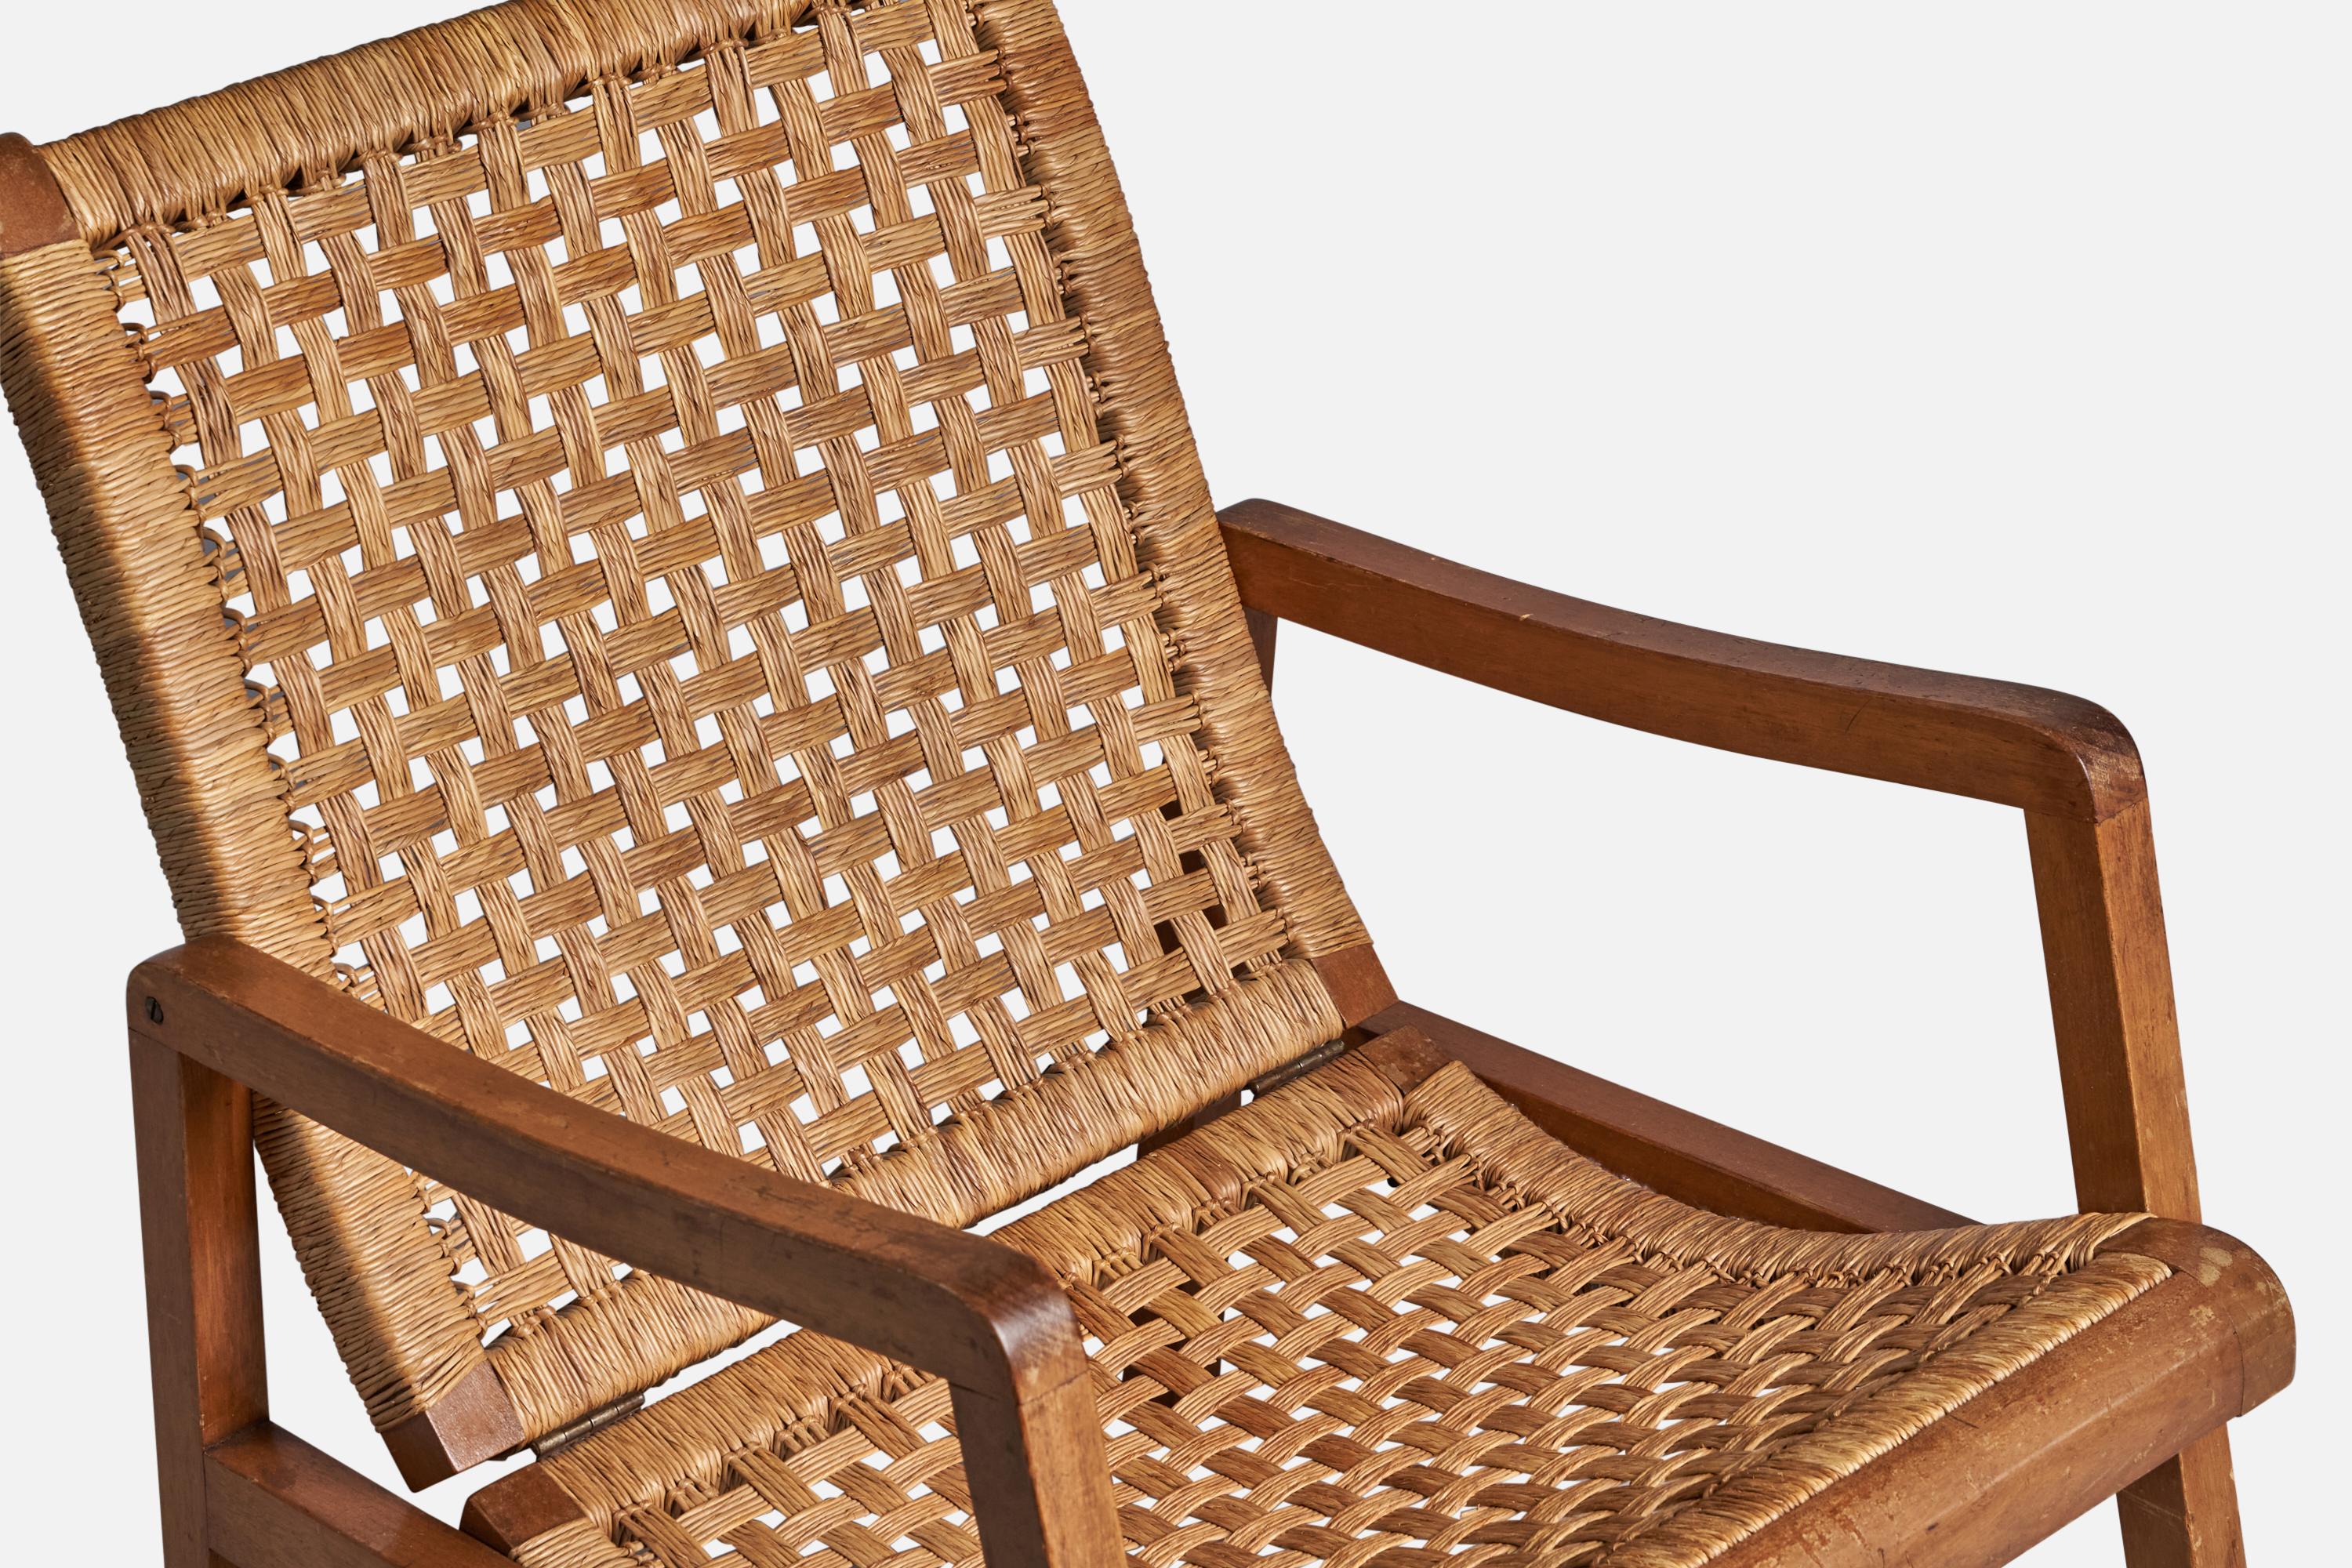 A cane and oak lounge chair designed and produced in Mexico, c. 1950s.
11” seat height